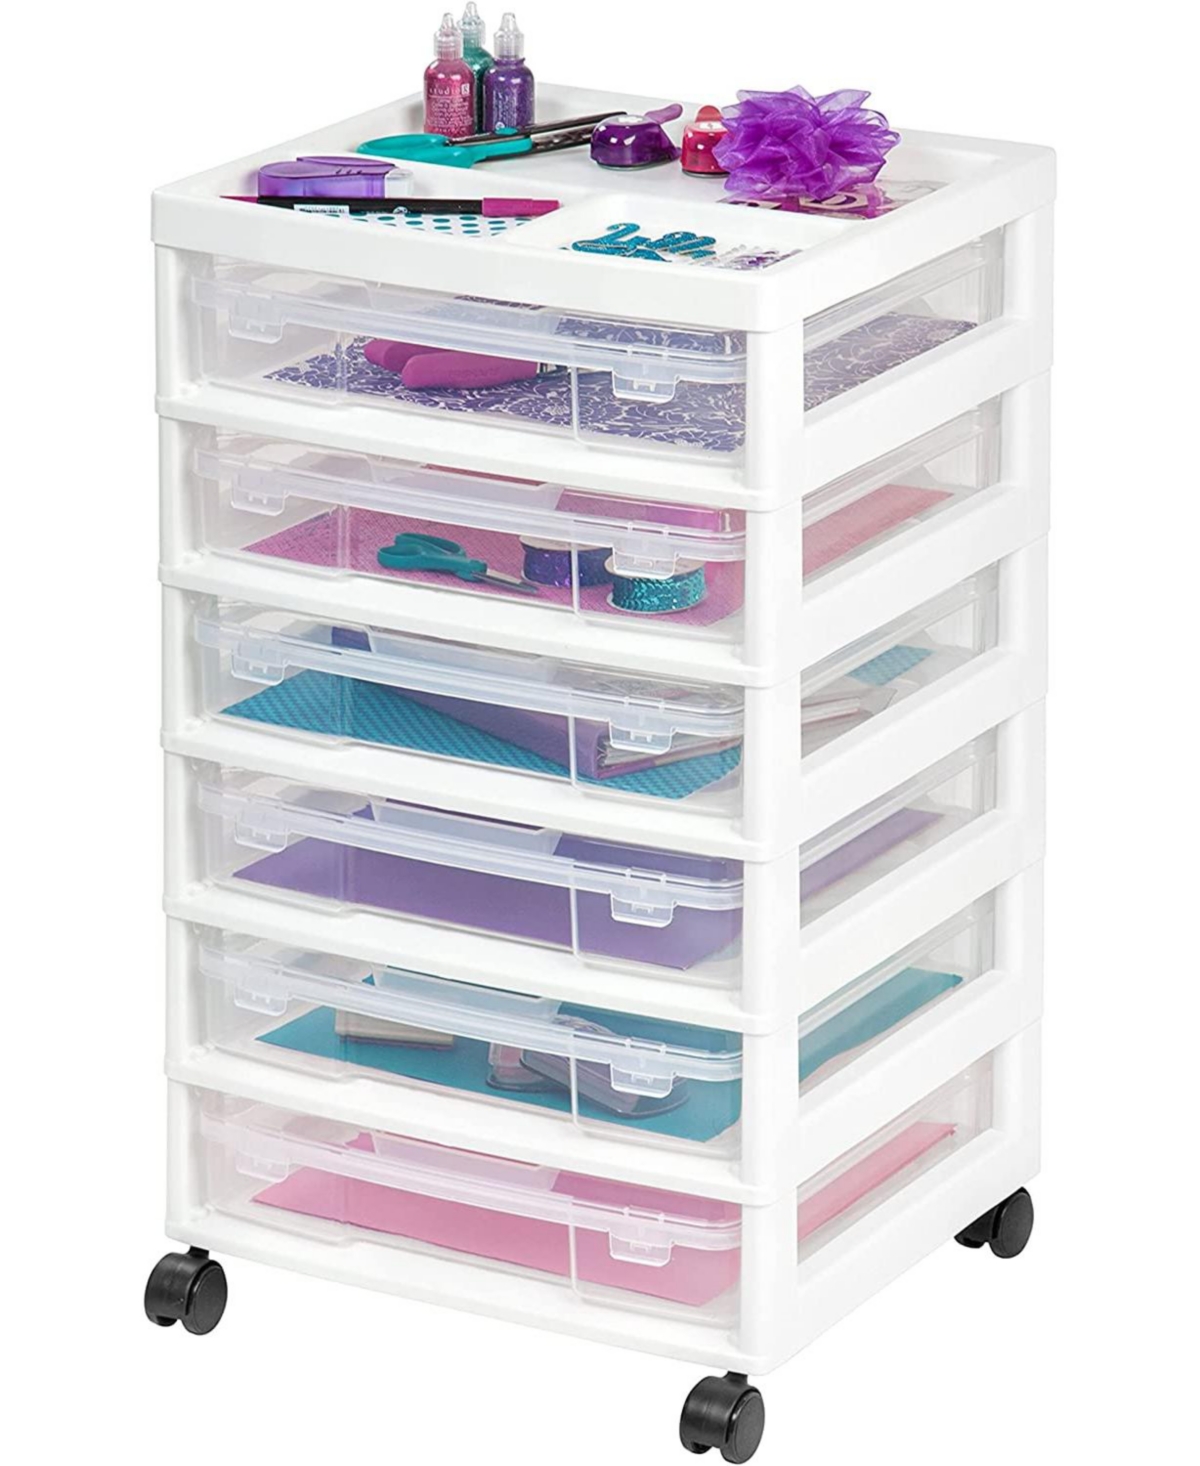 6 Drawers Scrapbook Plastic Storage Cart with Organizer Top with Casters, White - White